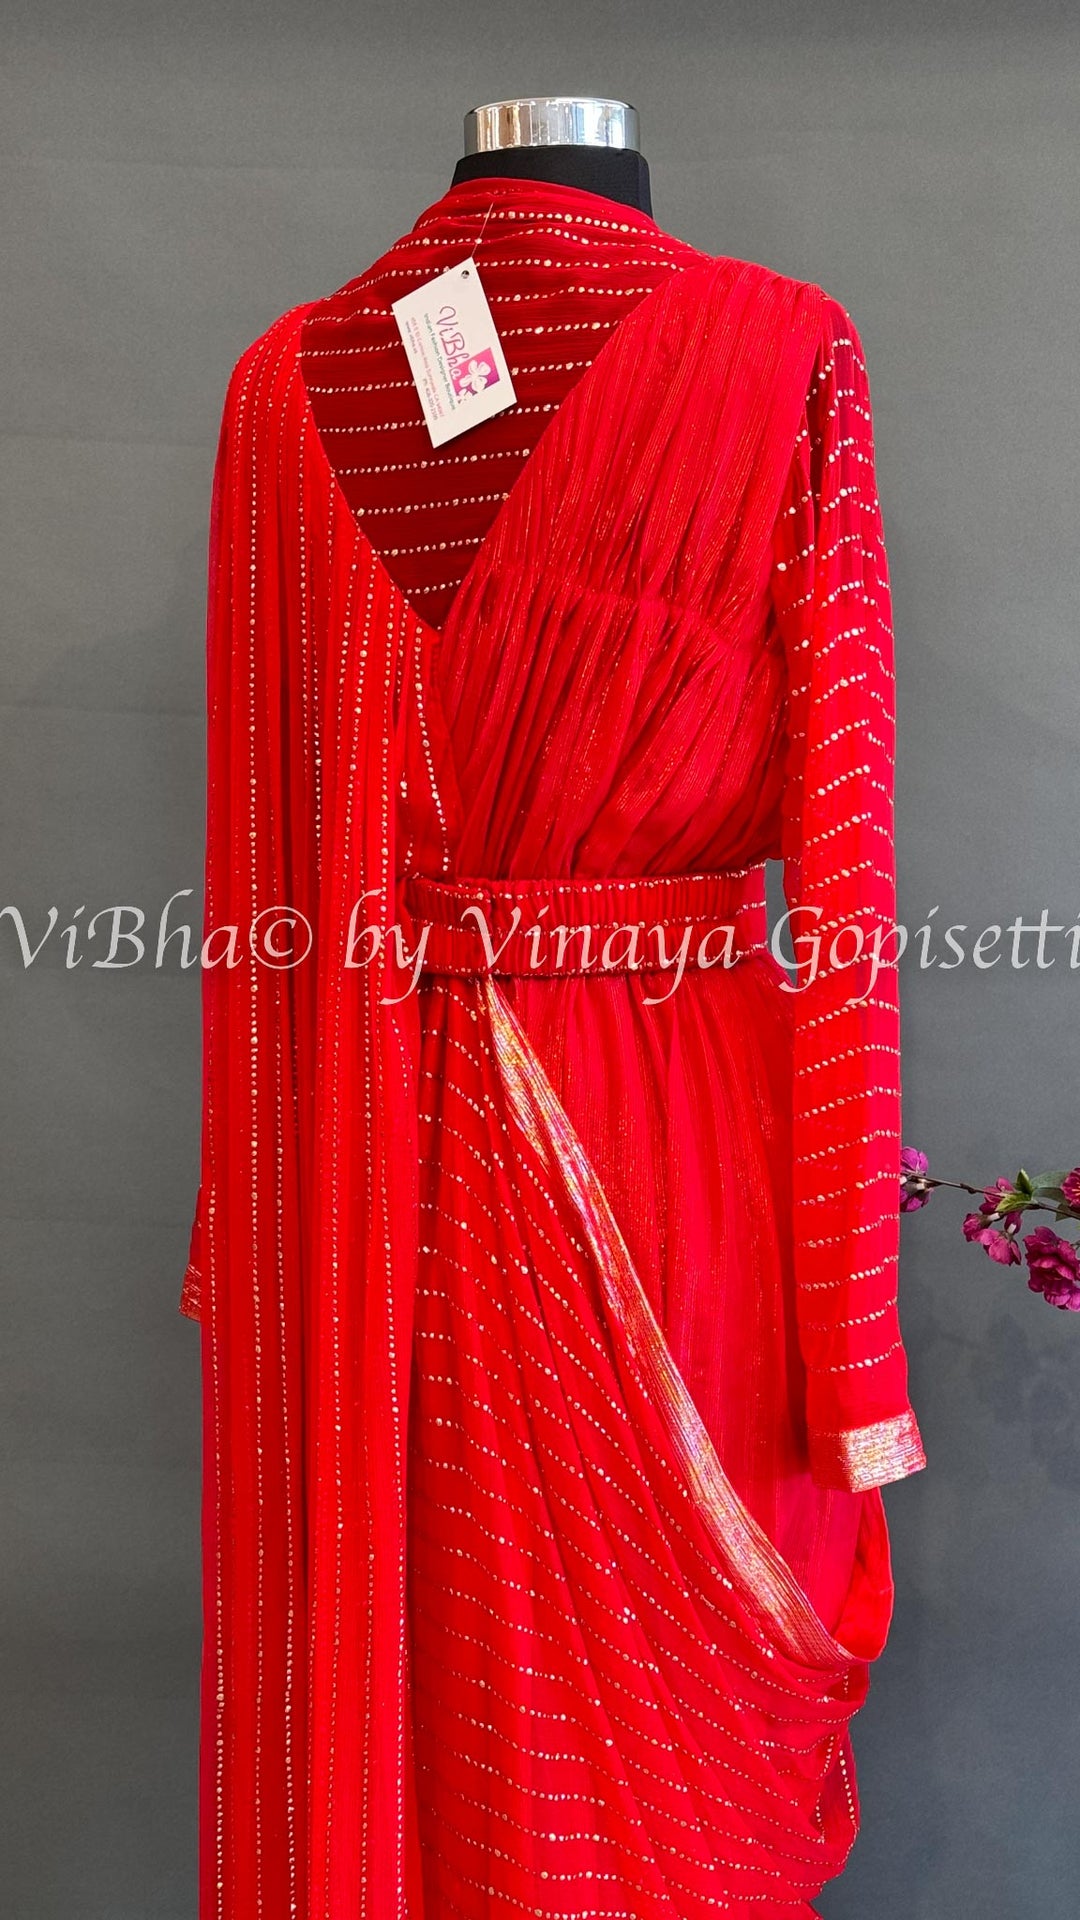 Red Saree Draped Gown